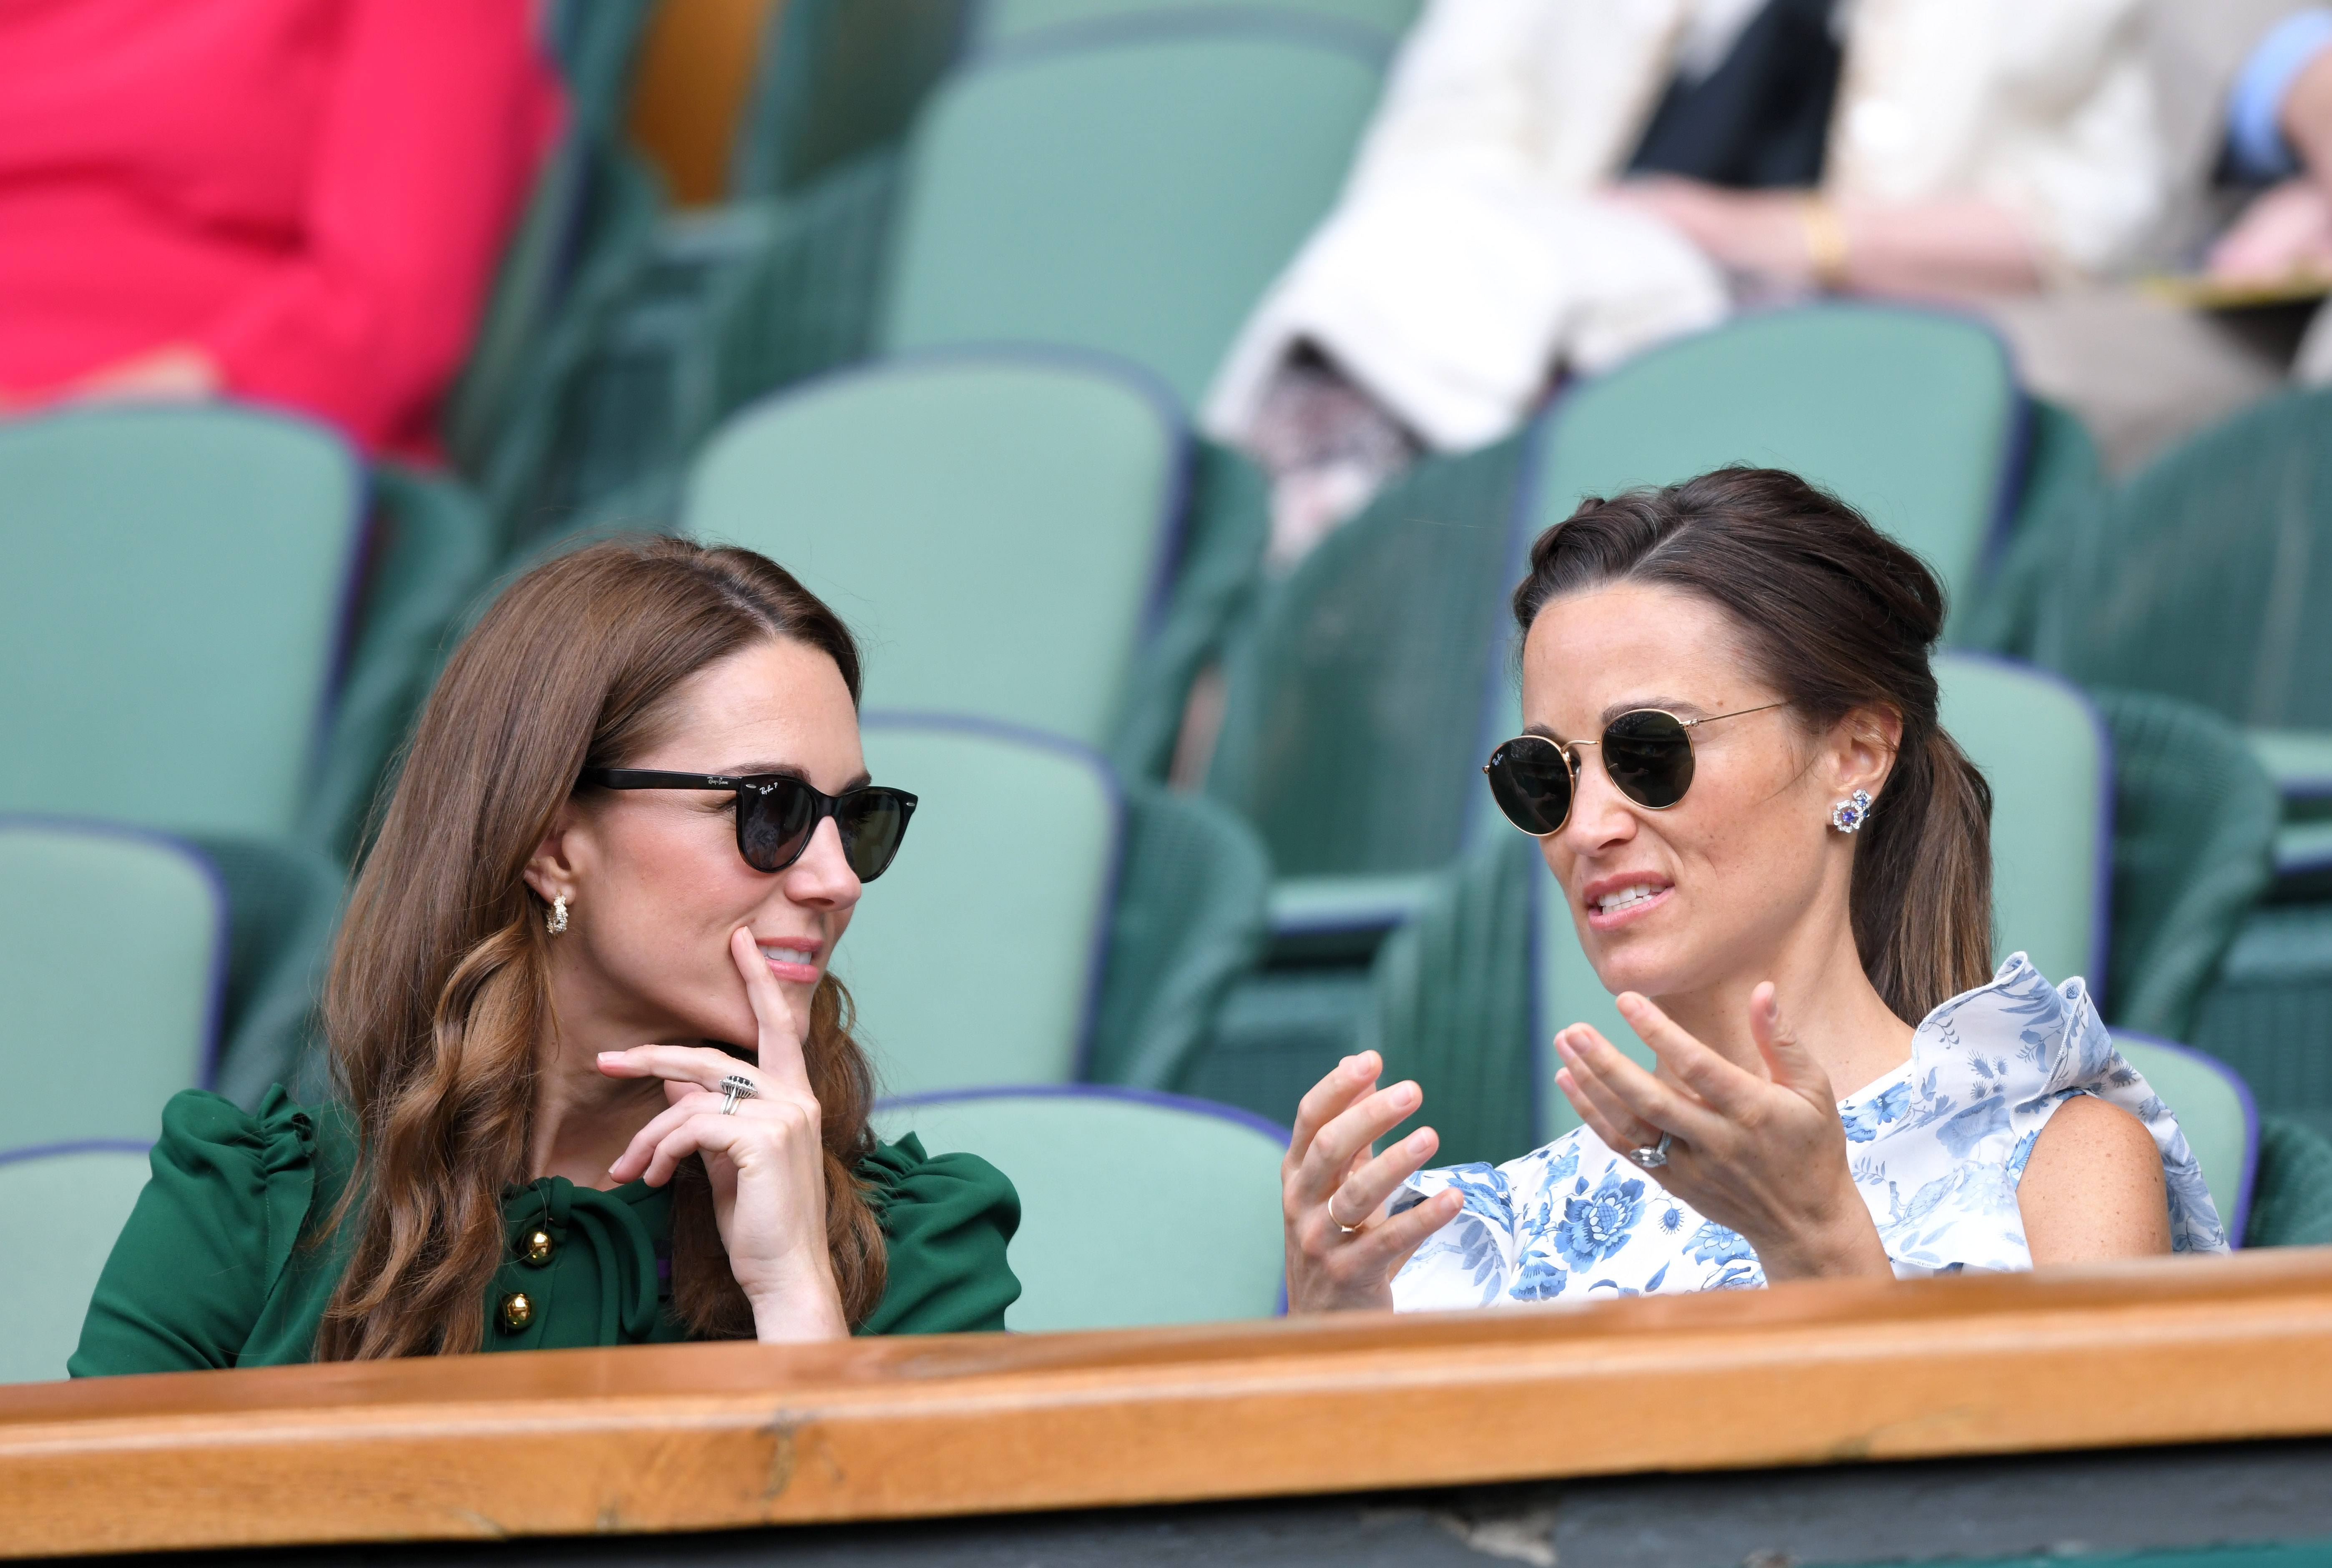 Kate and Pippa Middleton at the Wimbledon Tennis Championships in London, England on July 13, 2019 | Source: Getty Images